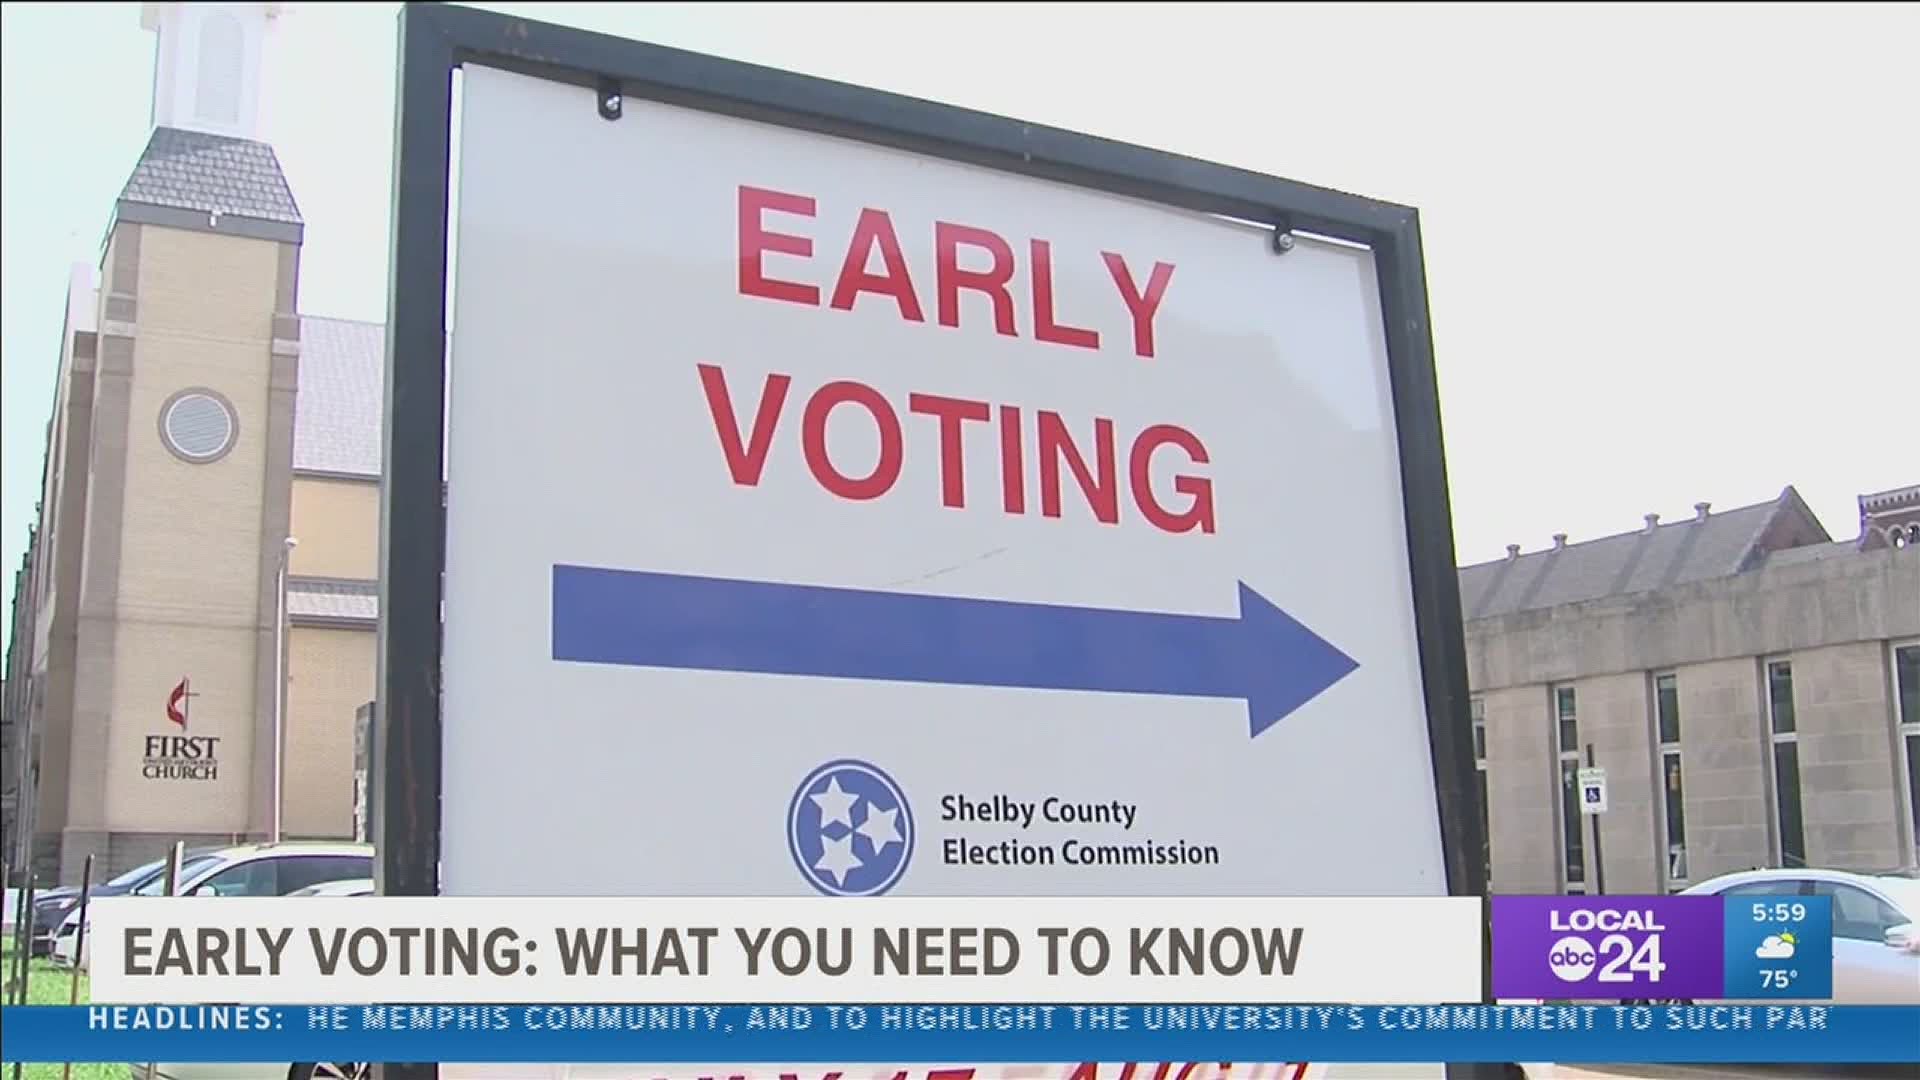 Tennessee voters set a record with early voting turnout in 2016.